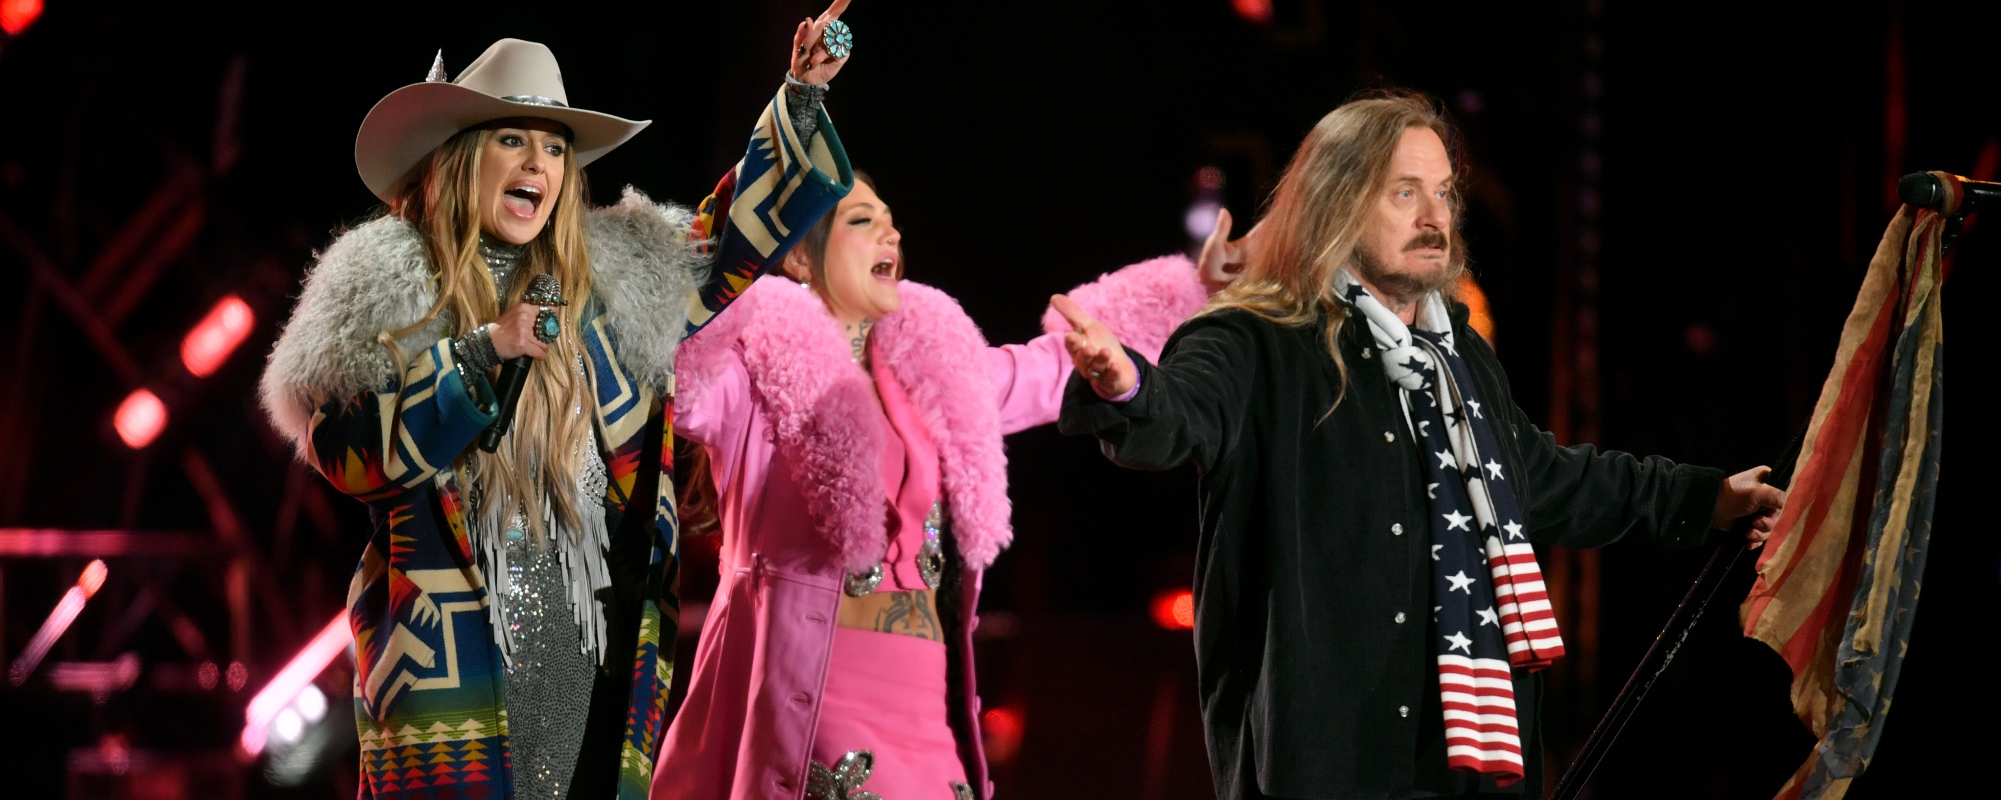 Watch Lynyrd Skynyrd, Lainey Wilson & Elle King Ring in the New Year With “Sweet Home Alabama”